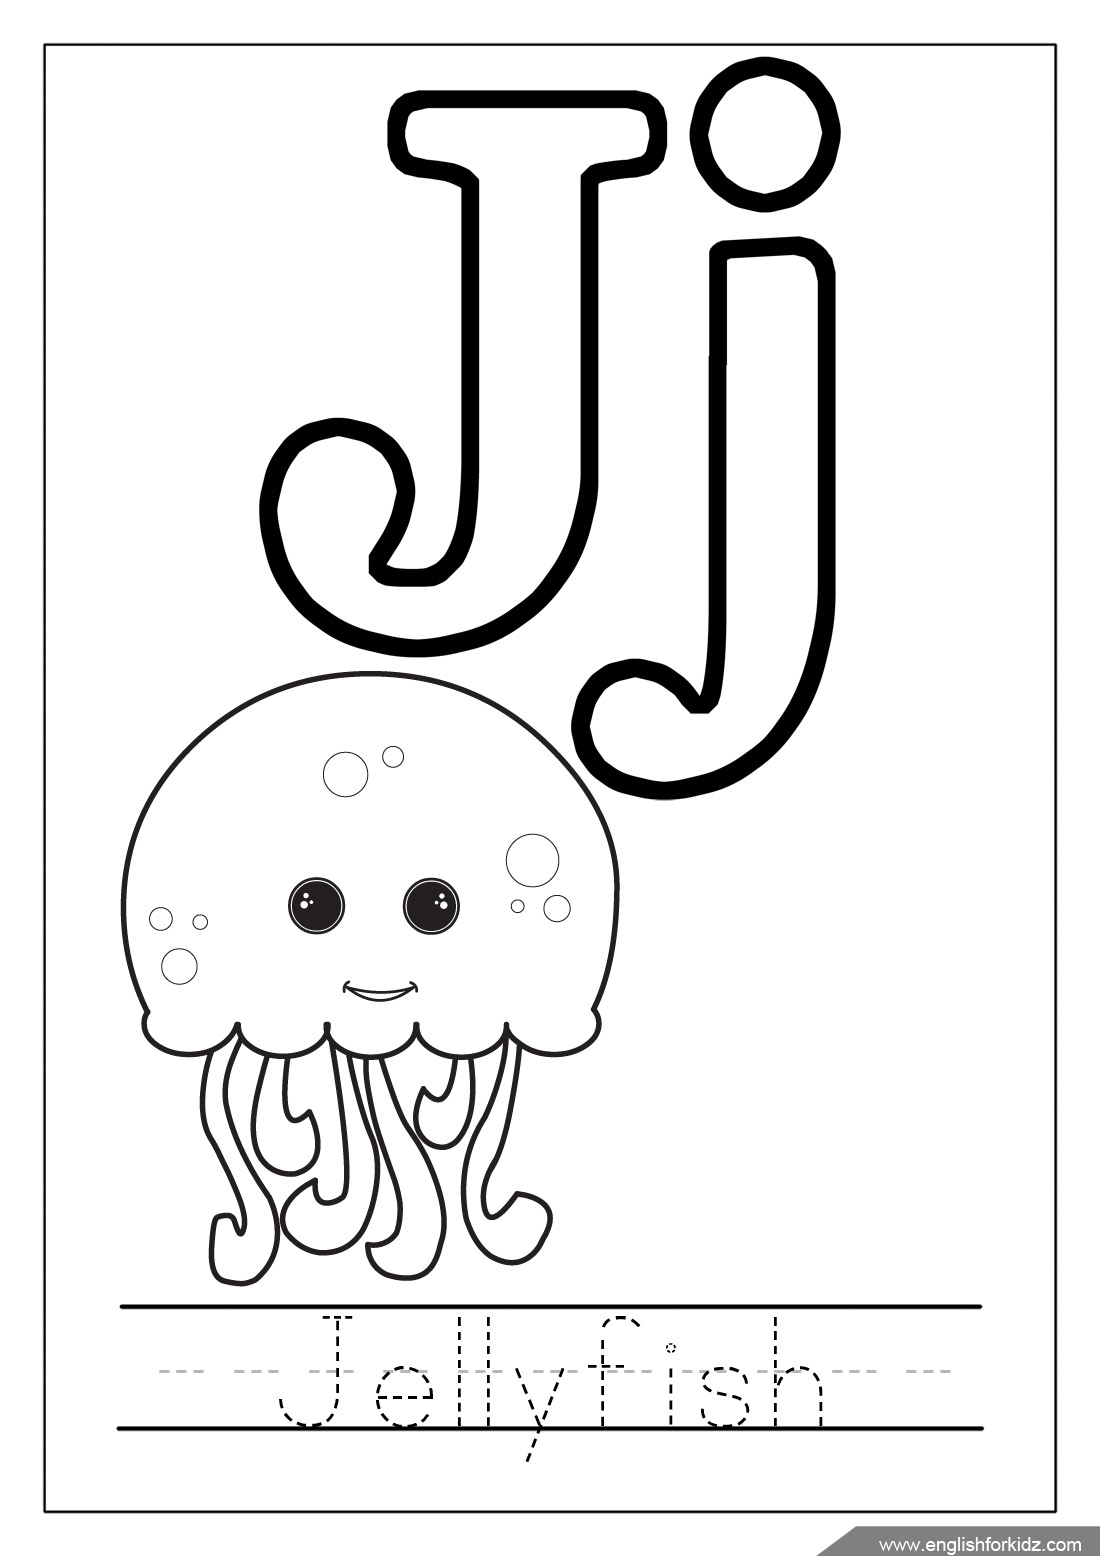 English for kids step by step letter j worksheets flash cards coloring pages